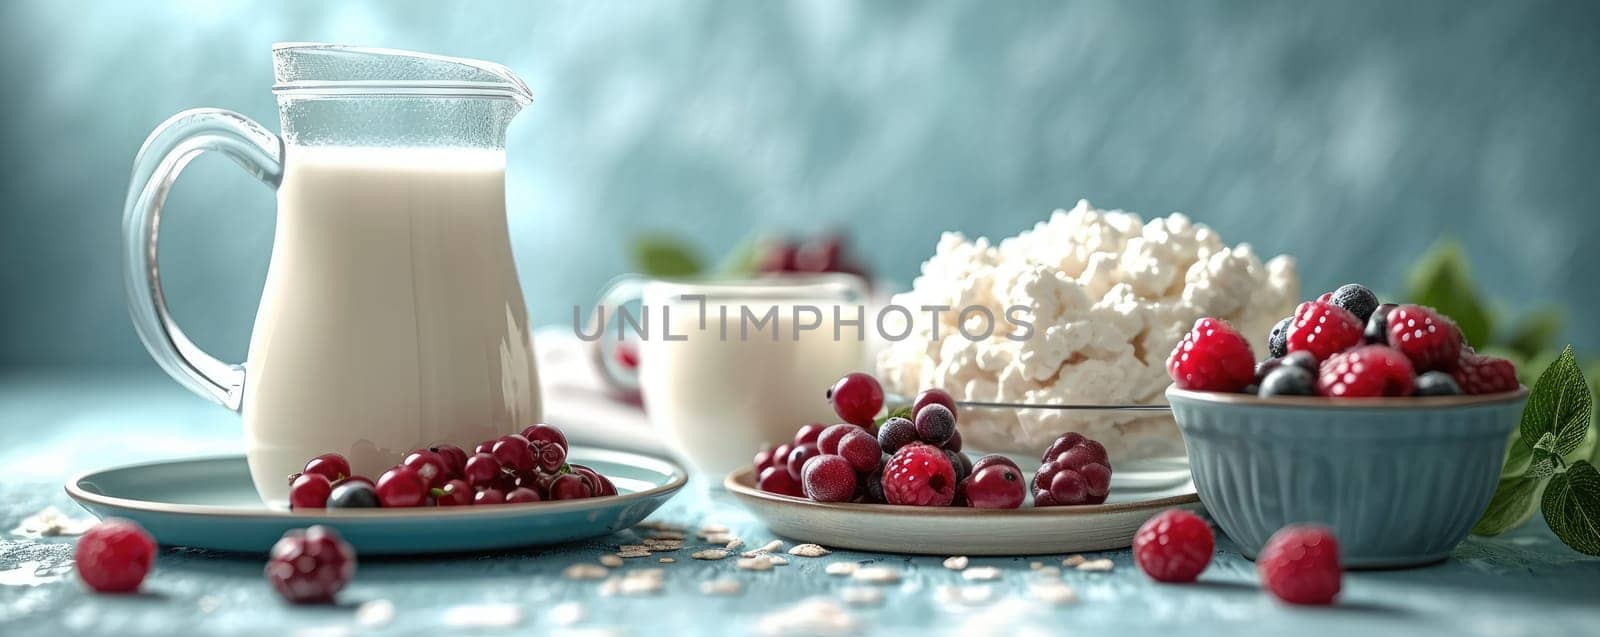 Breakfast with milk, cottage cheese and berries on a blue background by Yurich32